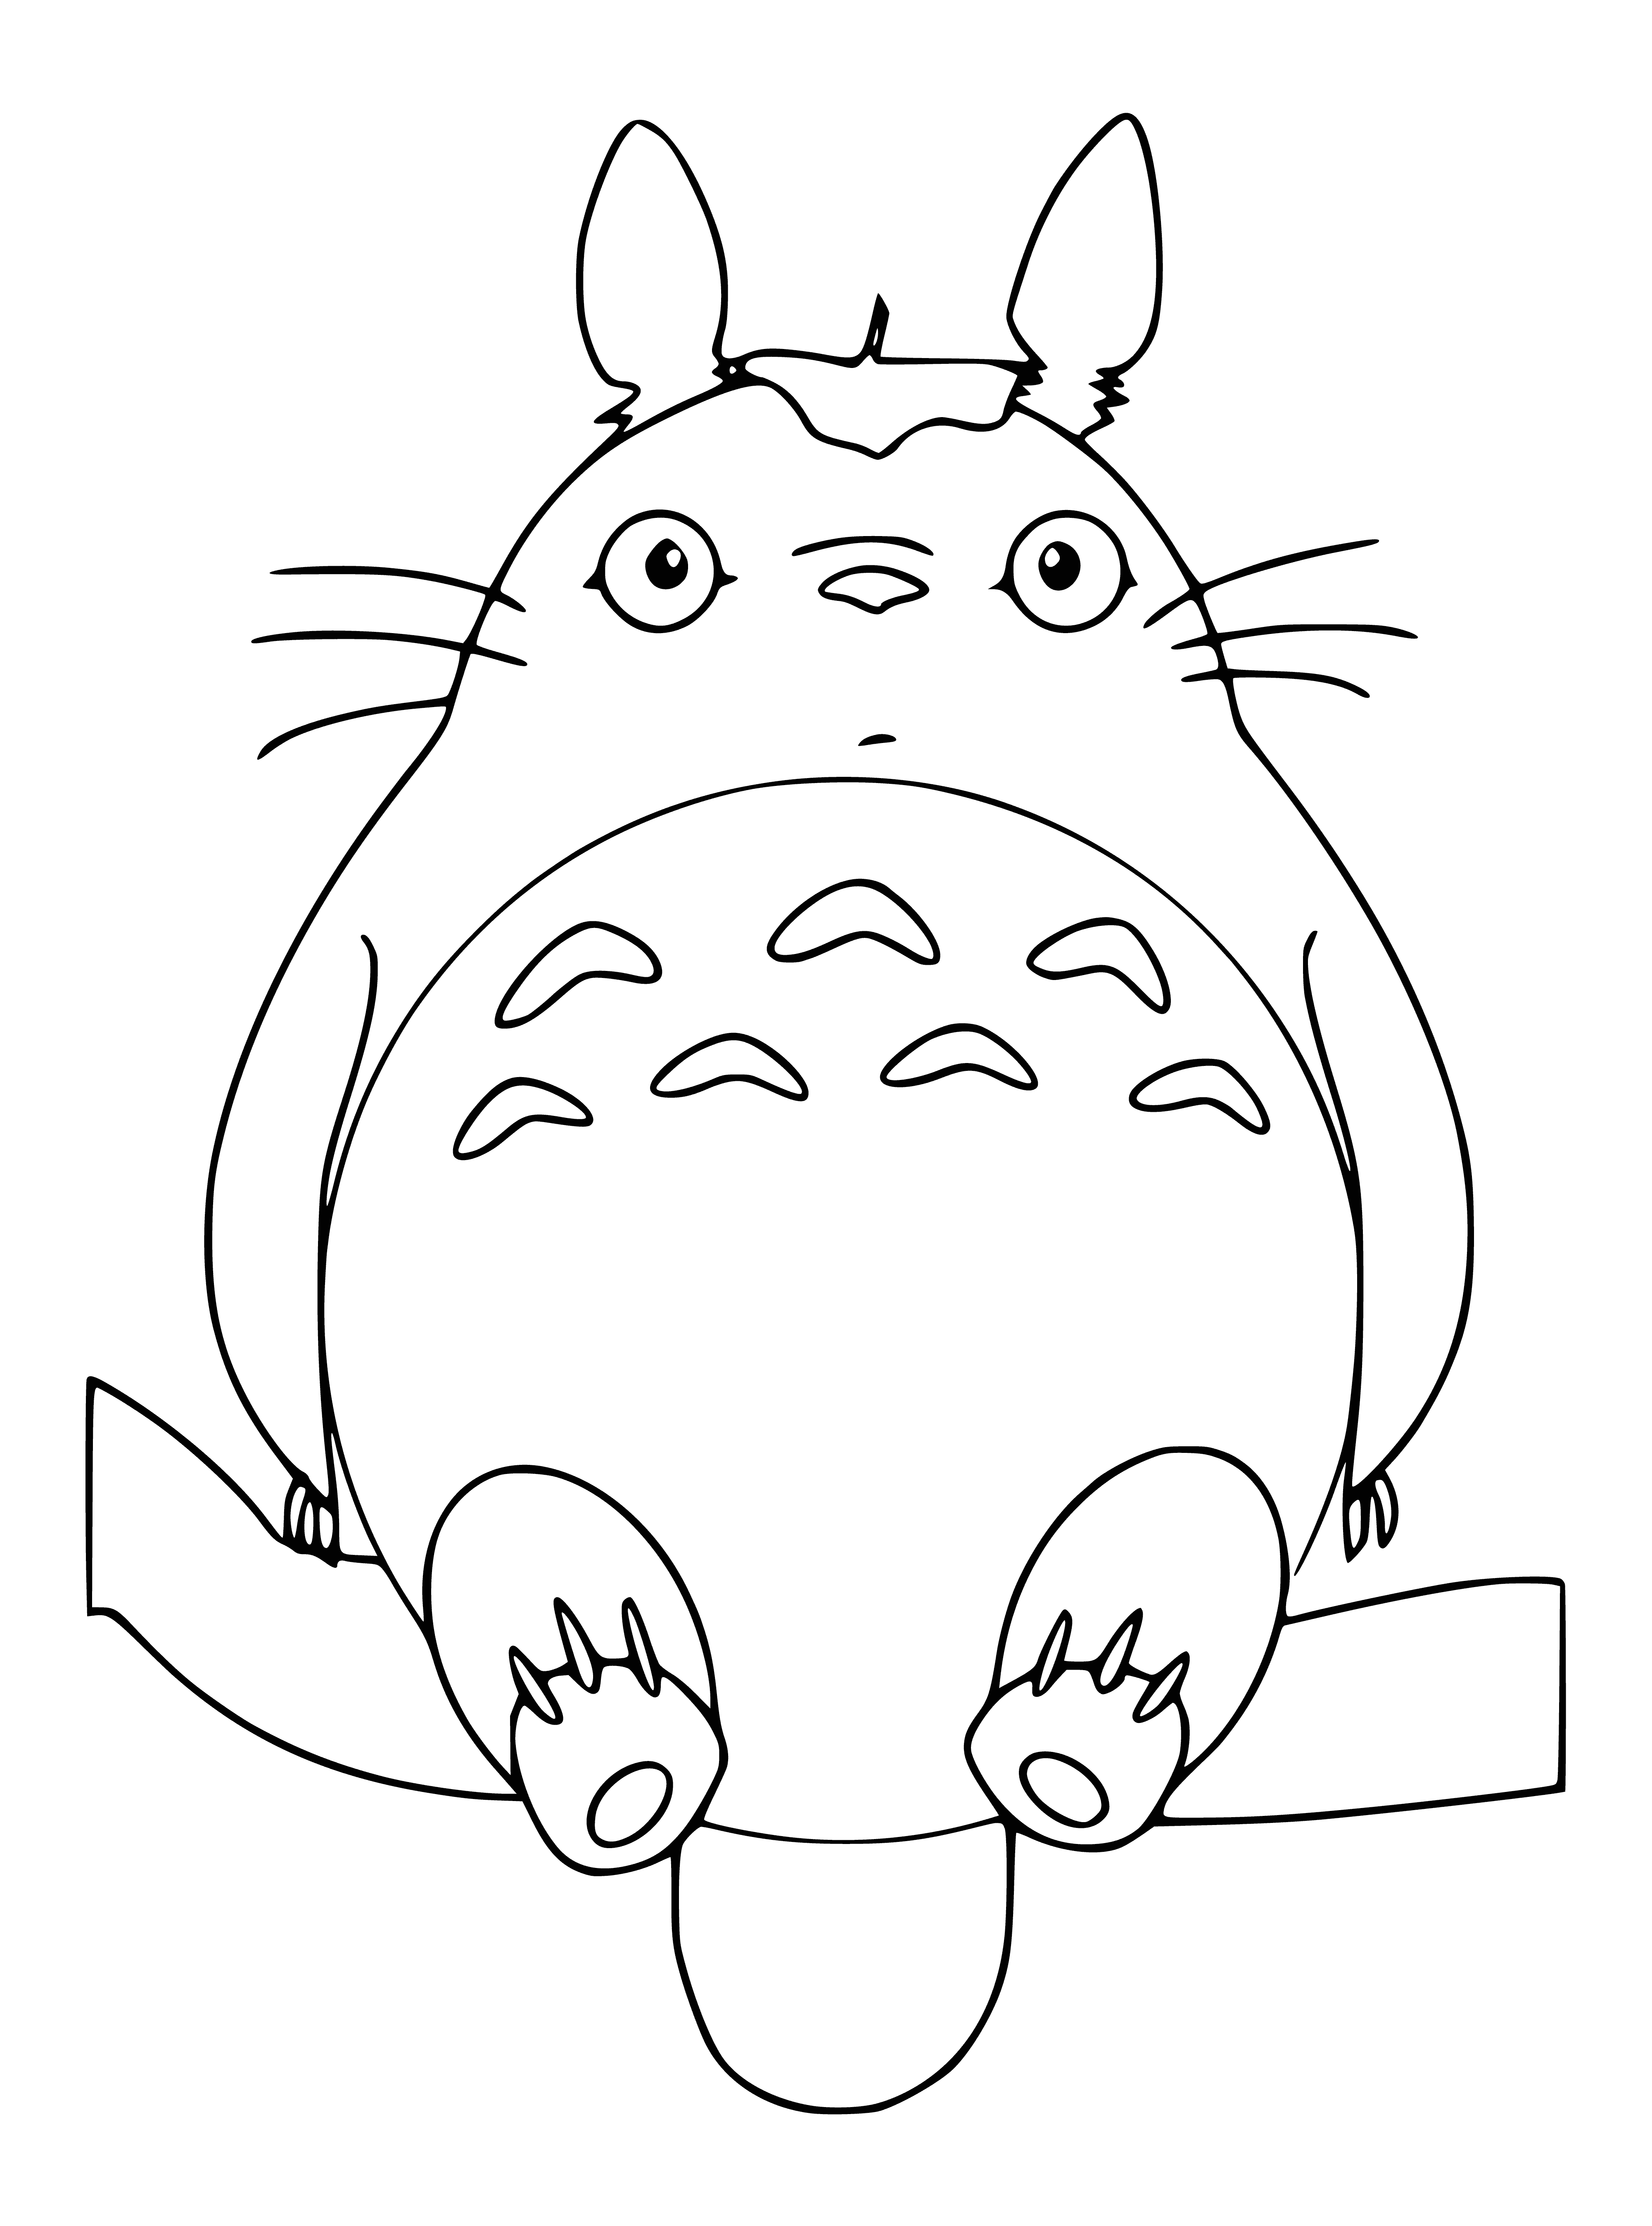 coloring page: Totoro, big ears & nose, blue shirt, holding a leaf, sitting in a tree.